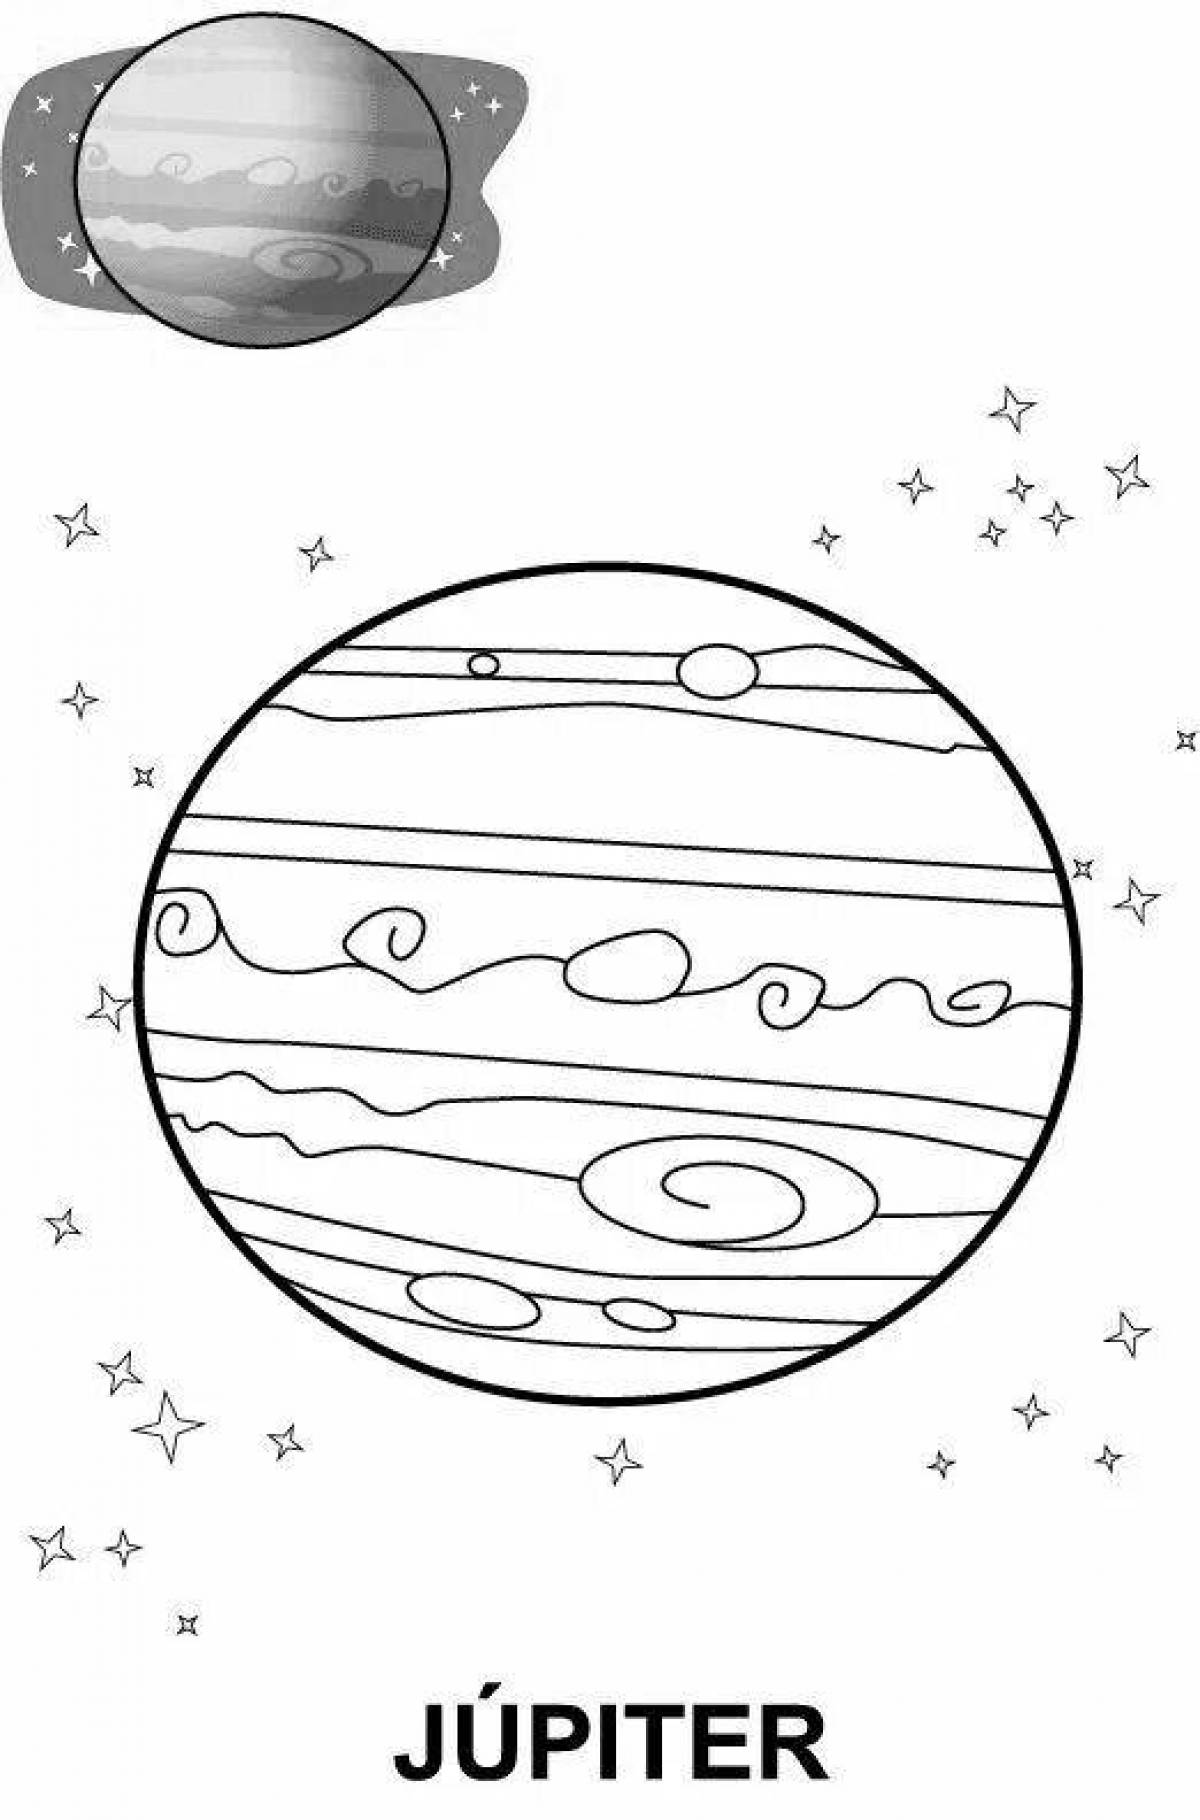 Colorfully stylized Jupiter coloring book